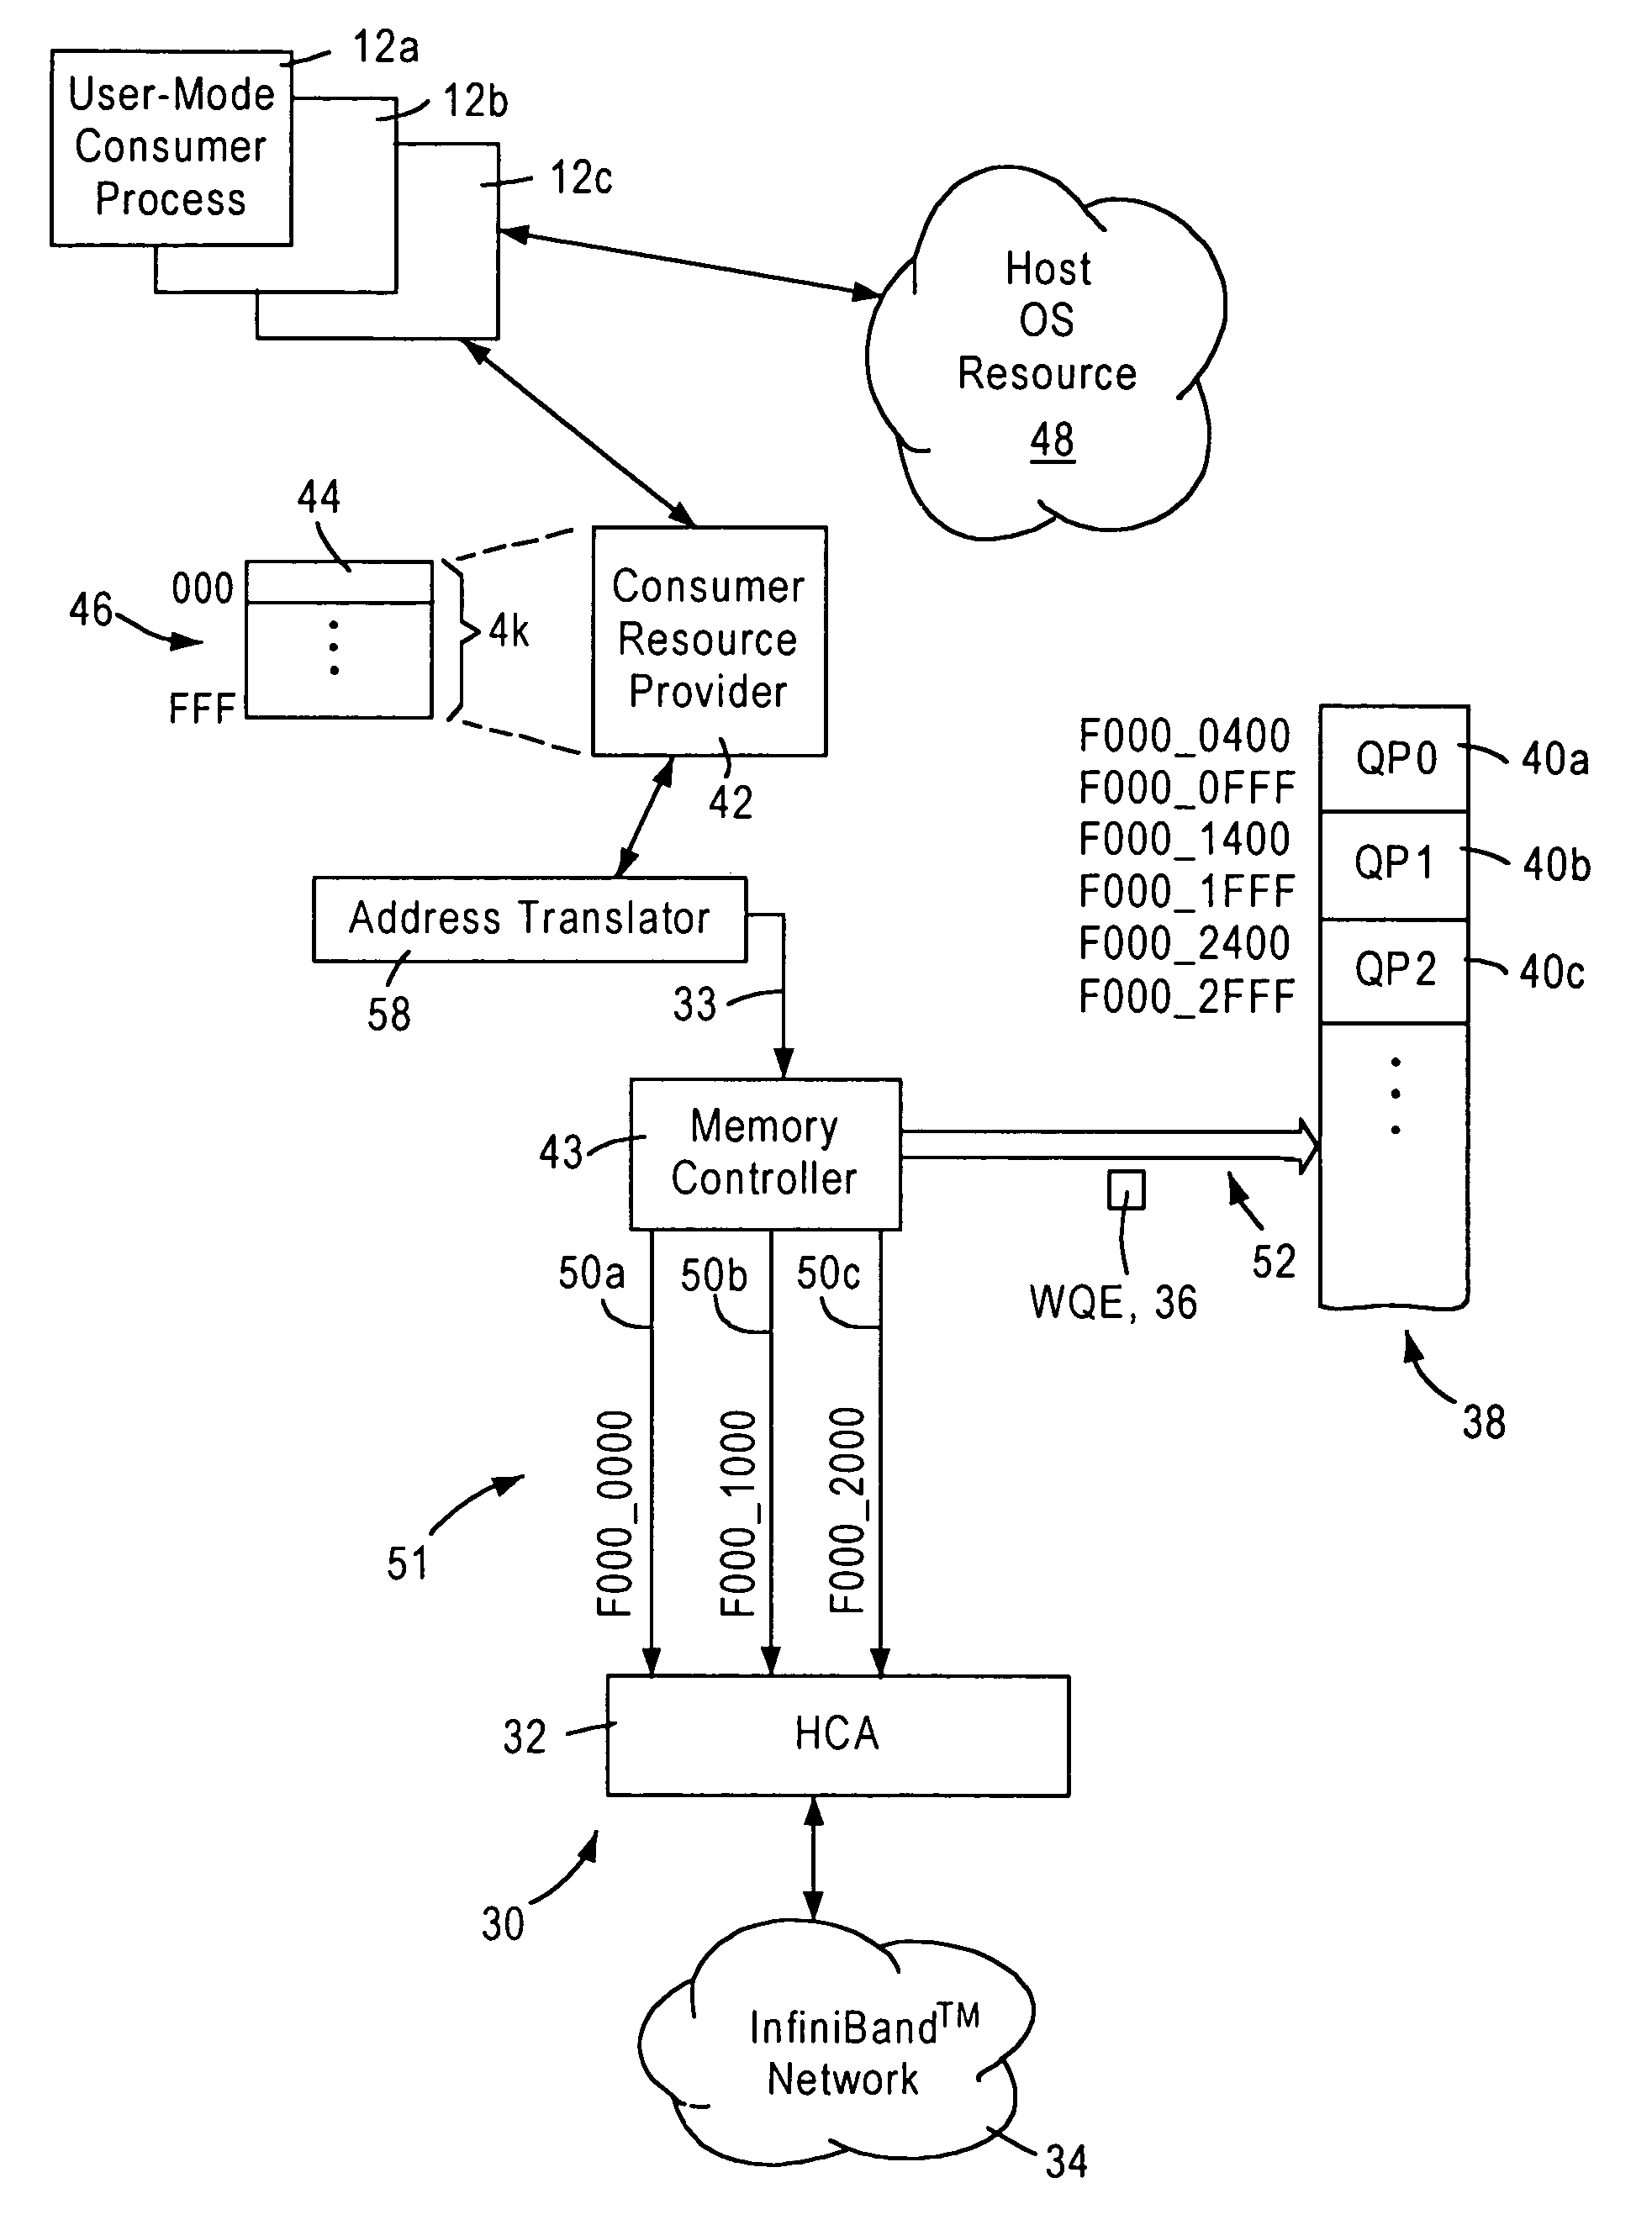 Arrangement for implementing kernel bypass for access by user mode consumer processes to a channel adapter based on virtual address mapping